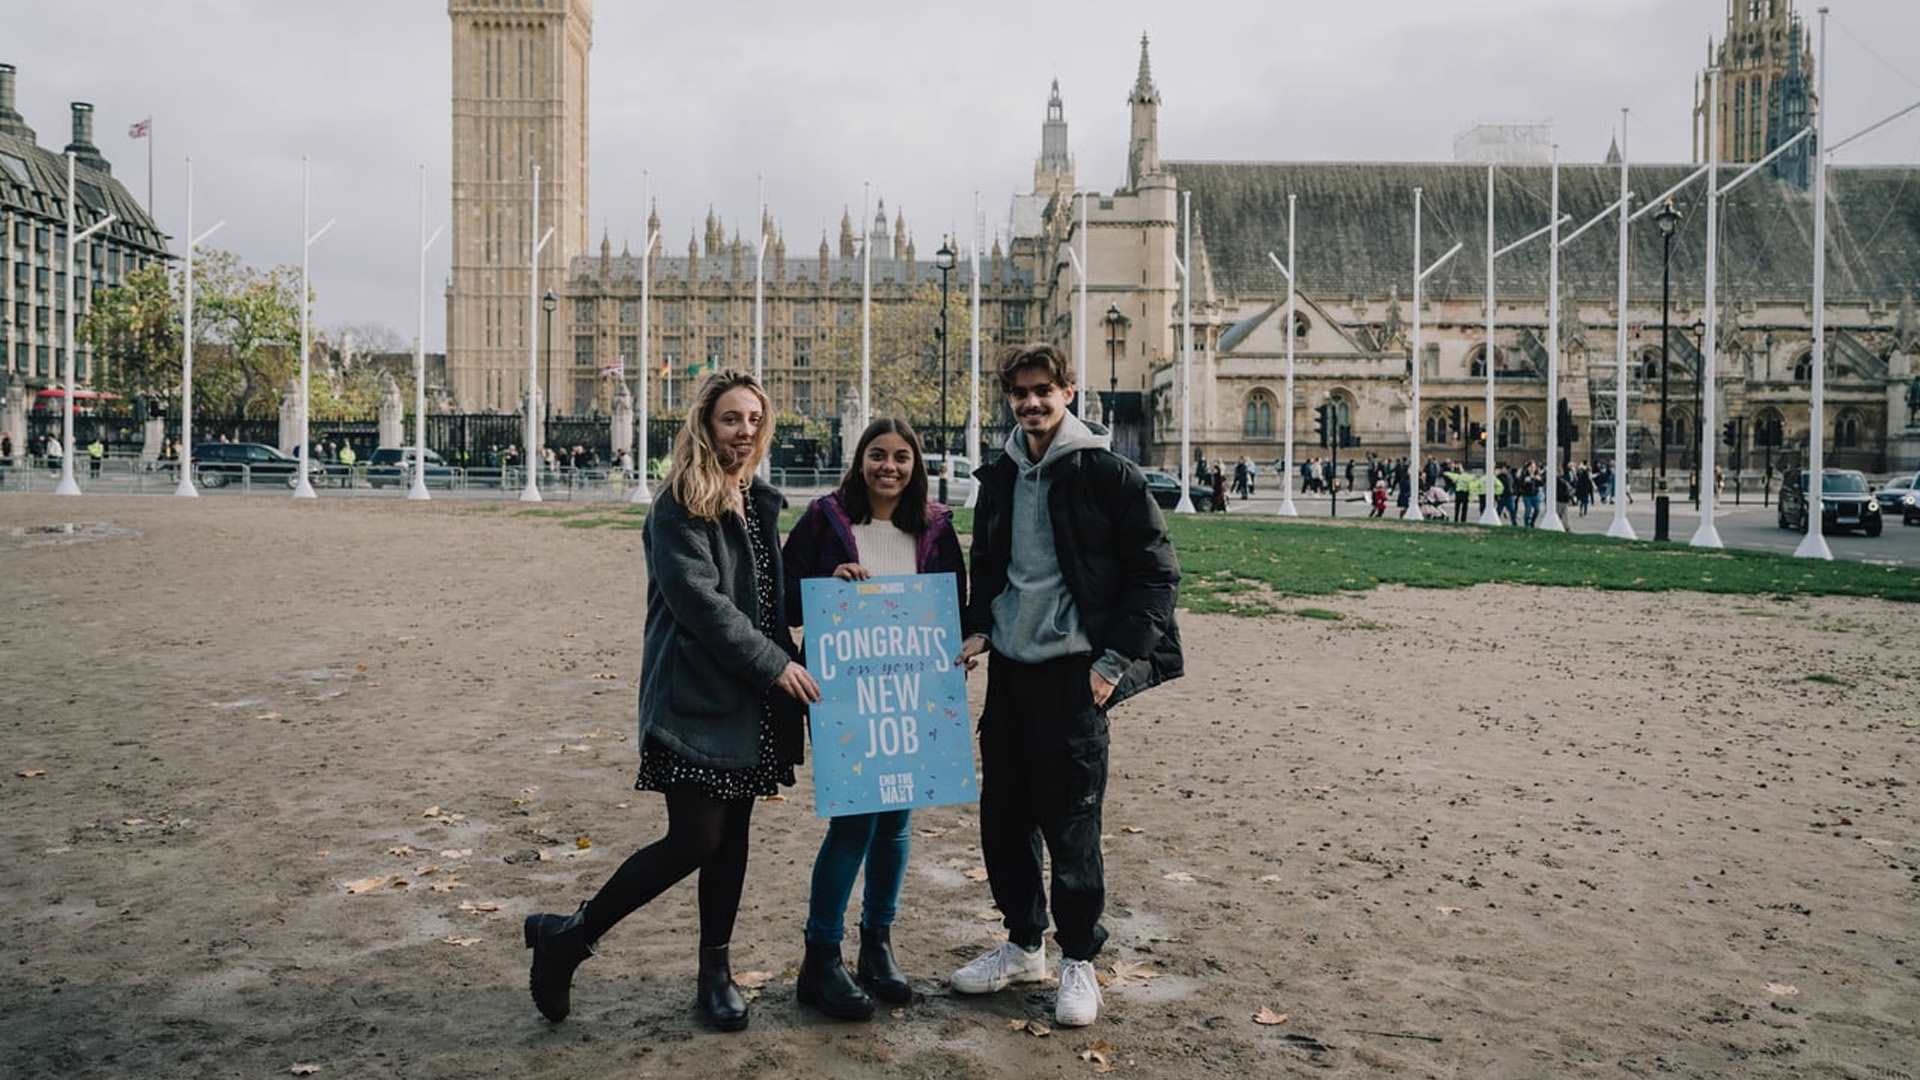 Three YoungMinds Activists standing in front of parliament holding a welcome card saying: 'Congrats on the new job'.